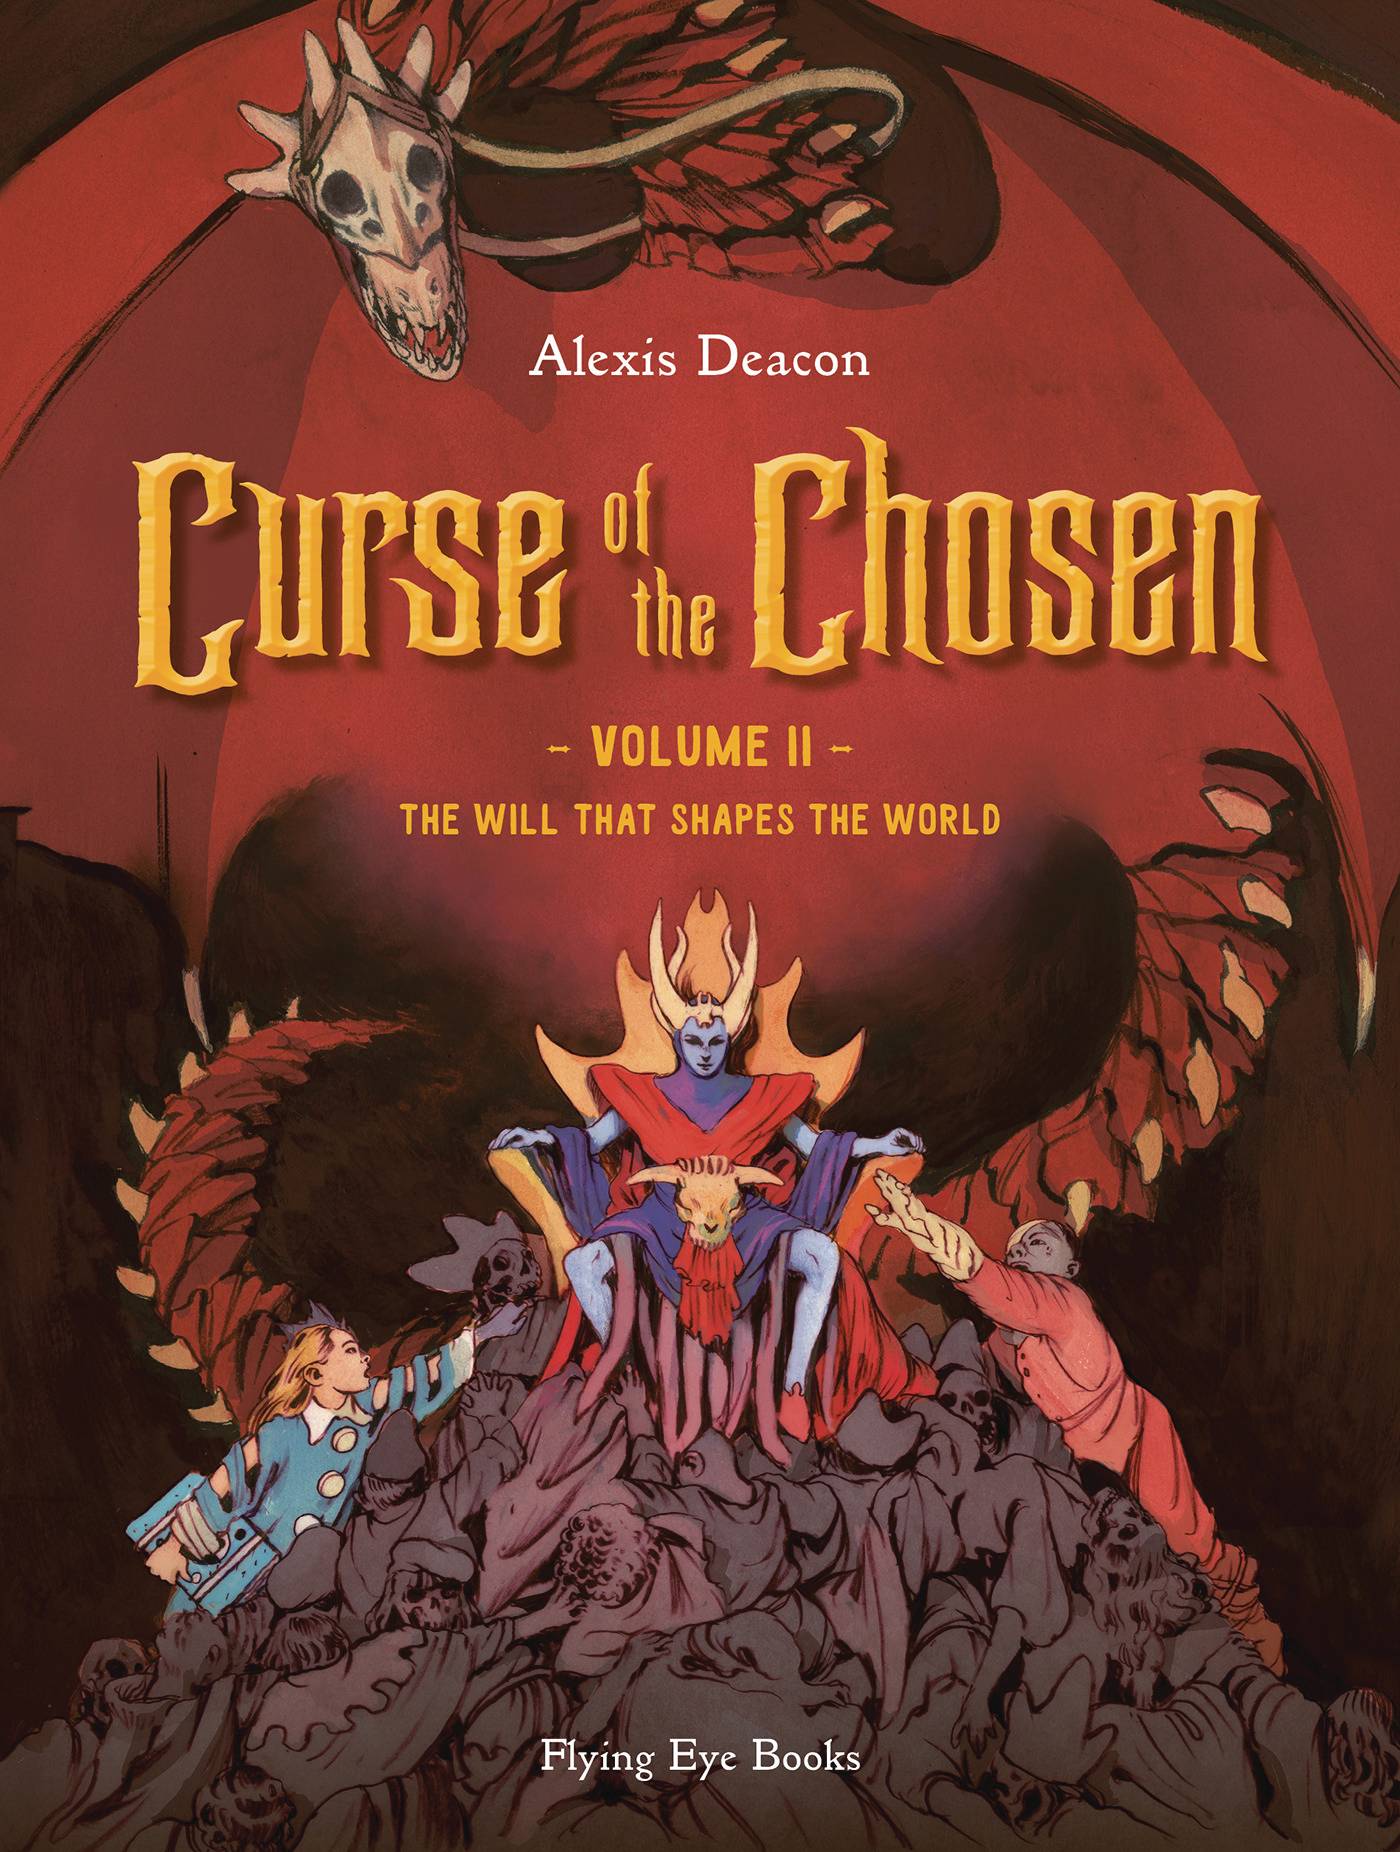 The One Stop Shop Comics & Games Curse Of The Chosen Gn Vol 02 Will That Shapes World (C: 1-1 (08/03/2022) NOBROW - FLYING EYE BOOKS